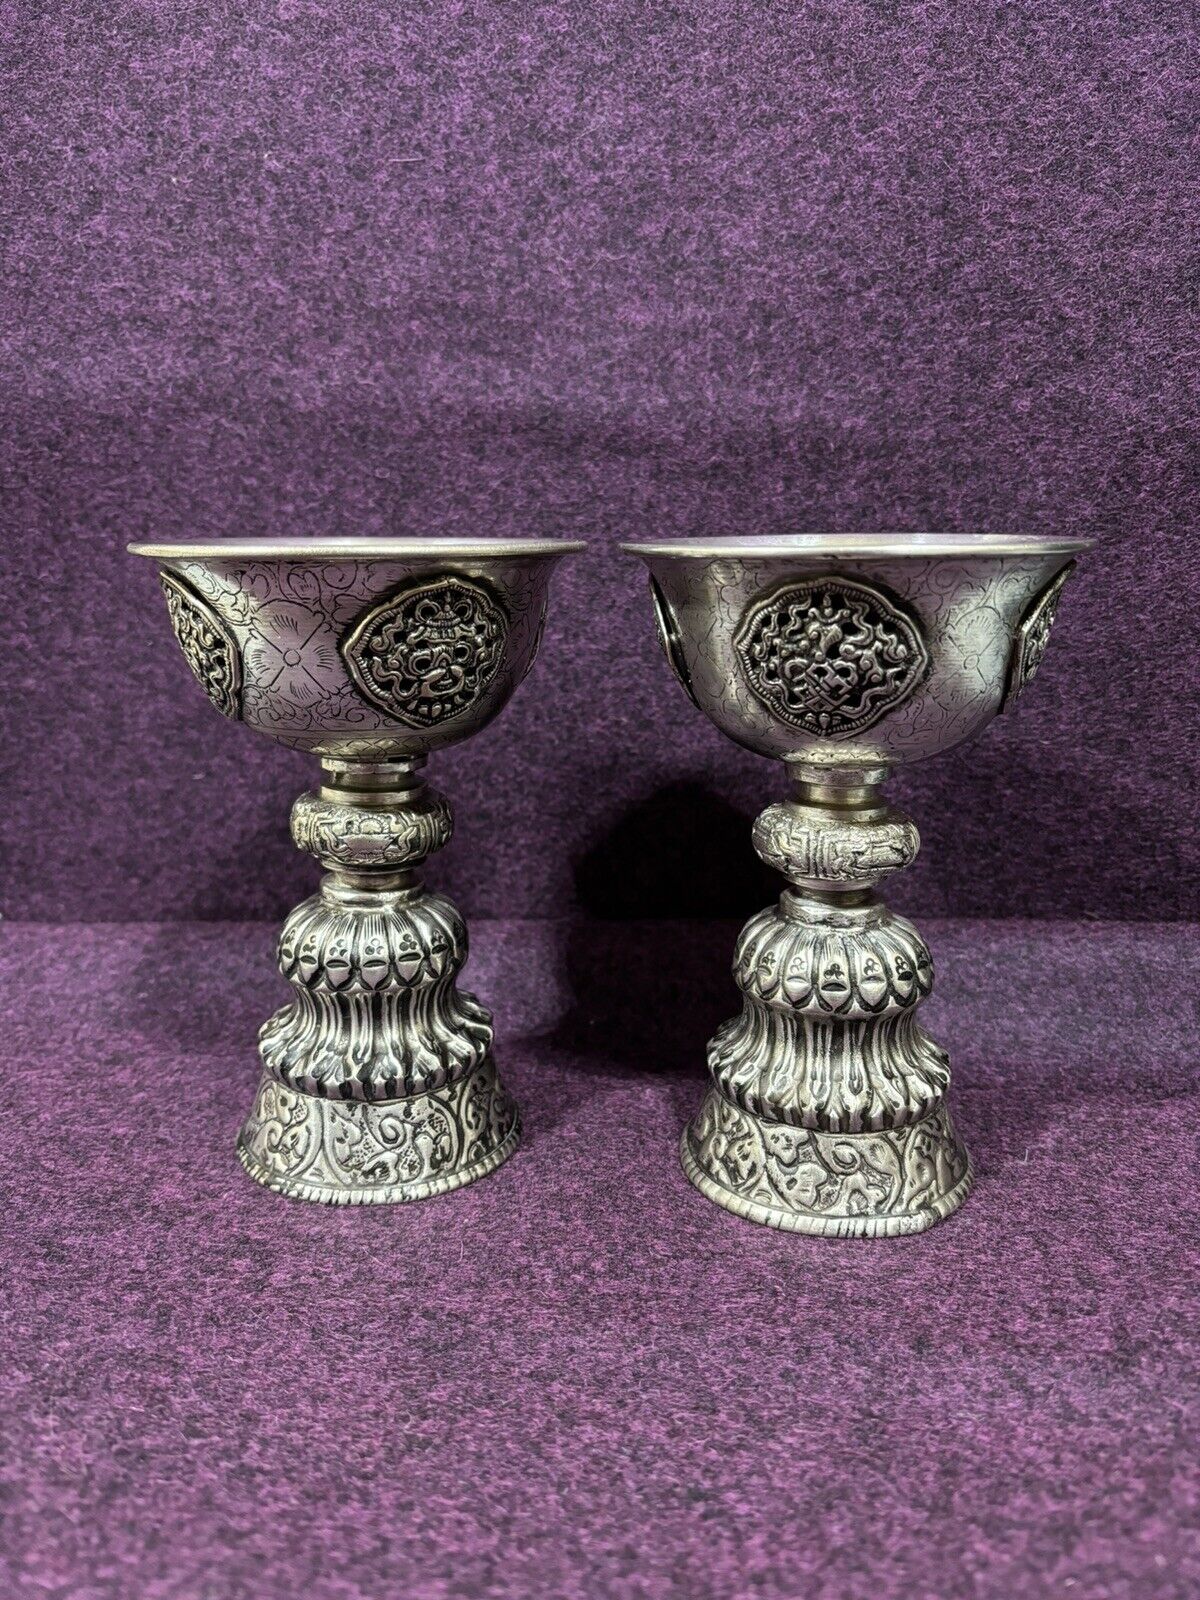 Antique  Buddhist Yak Butter Lamp | Ritual  | Handmade Vintage Lamp In Silver